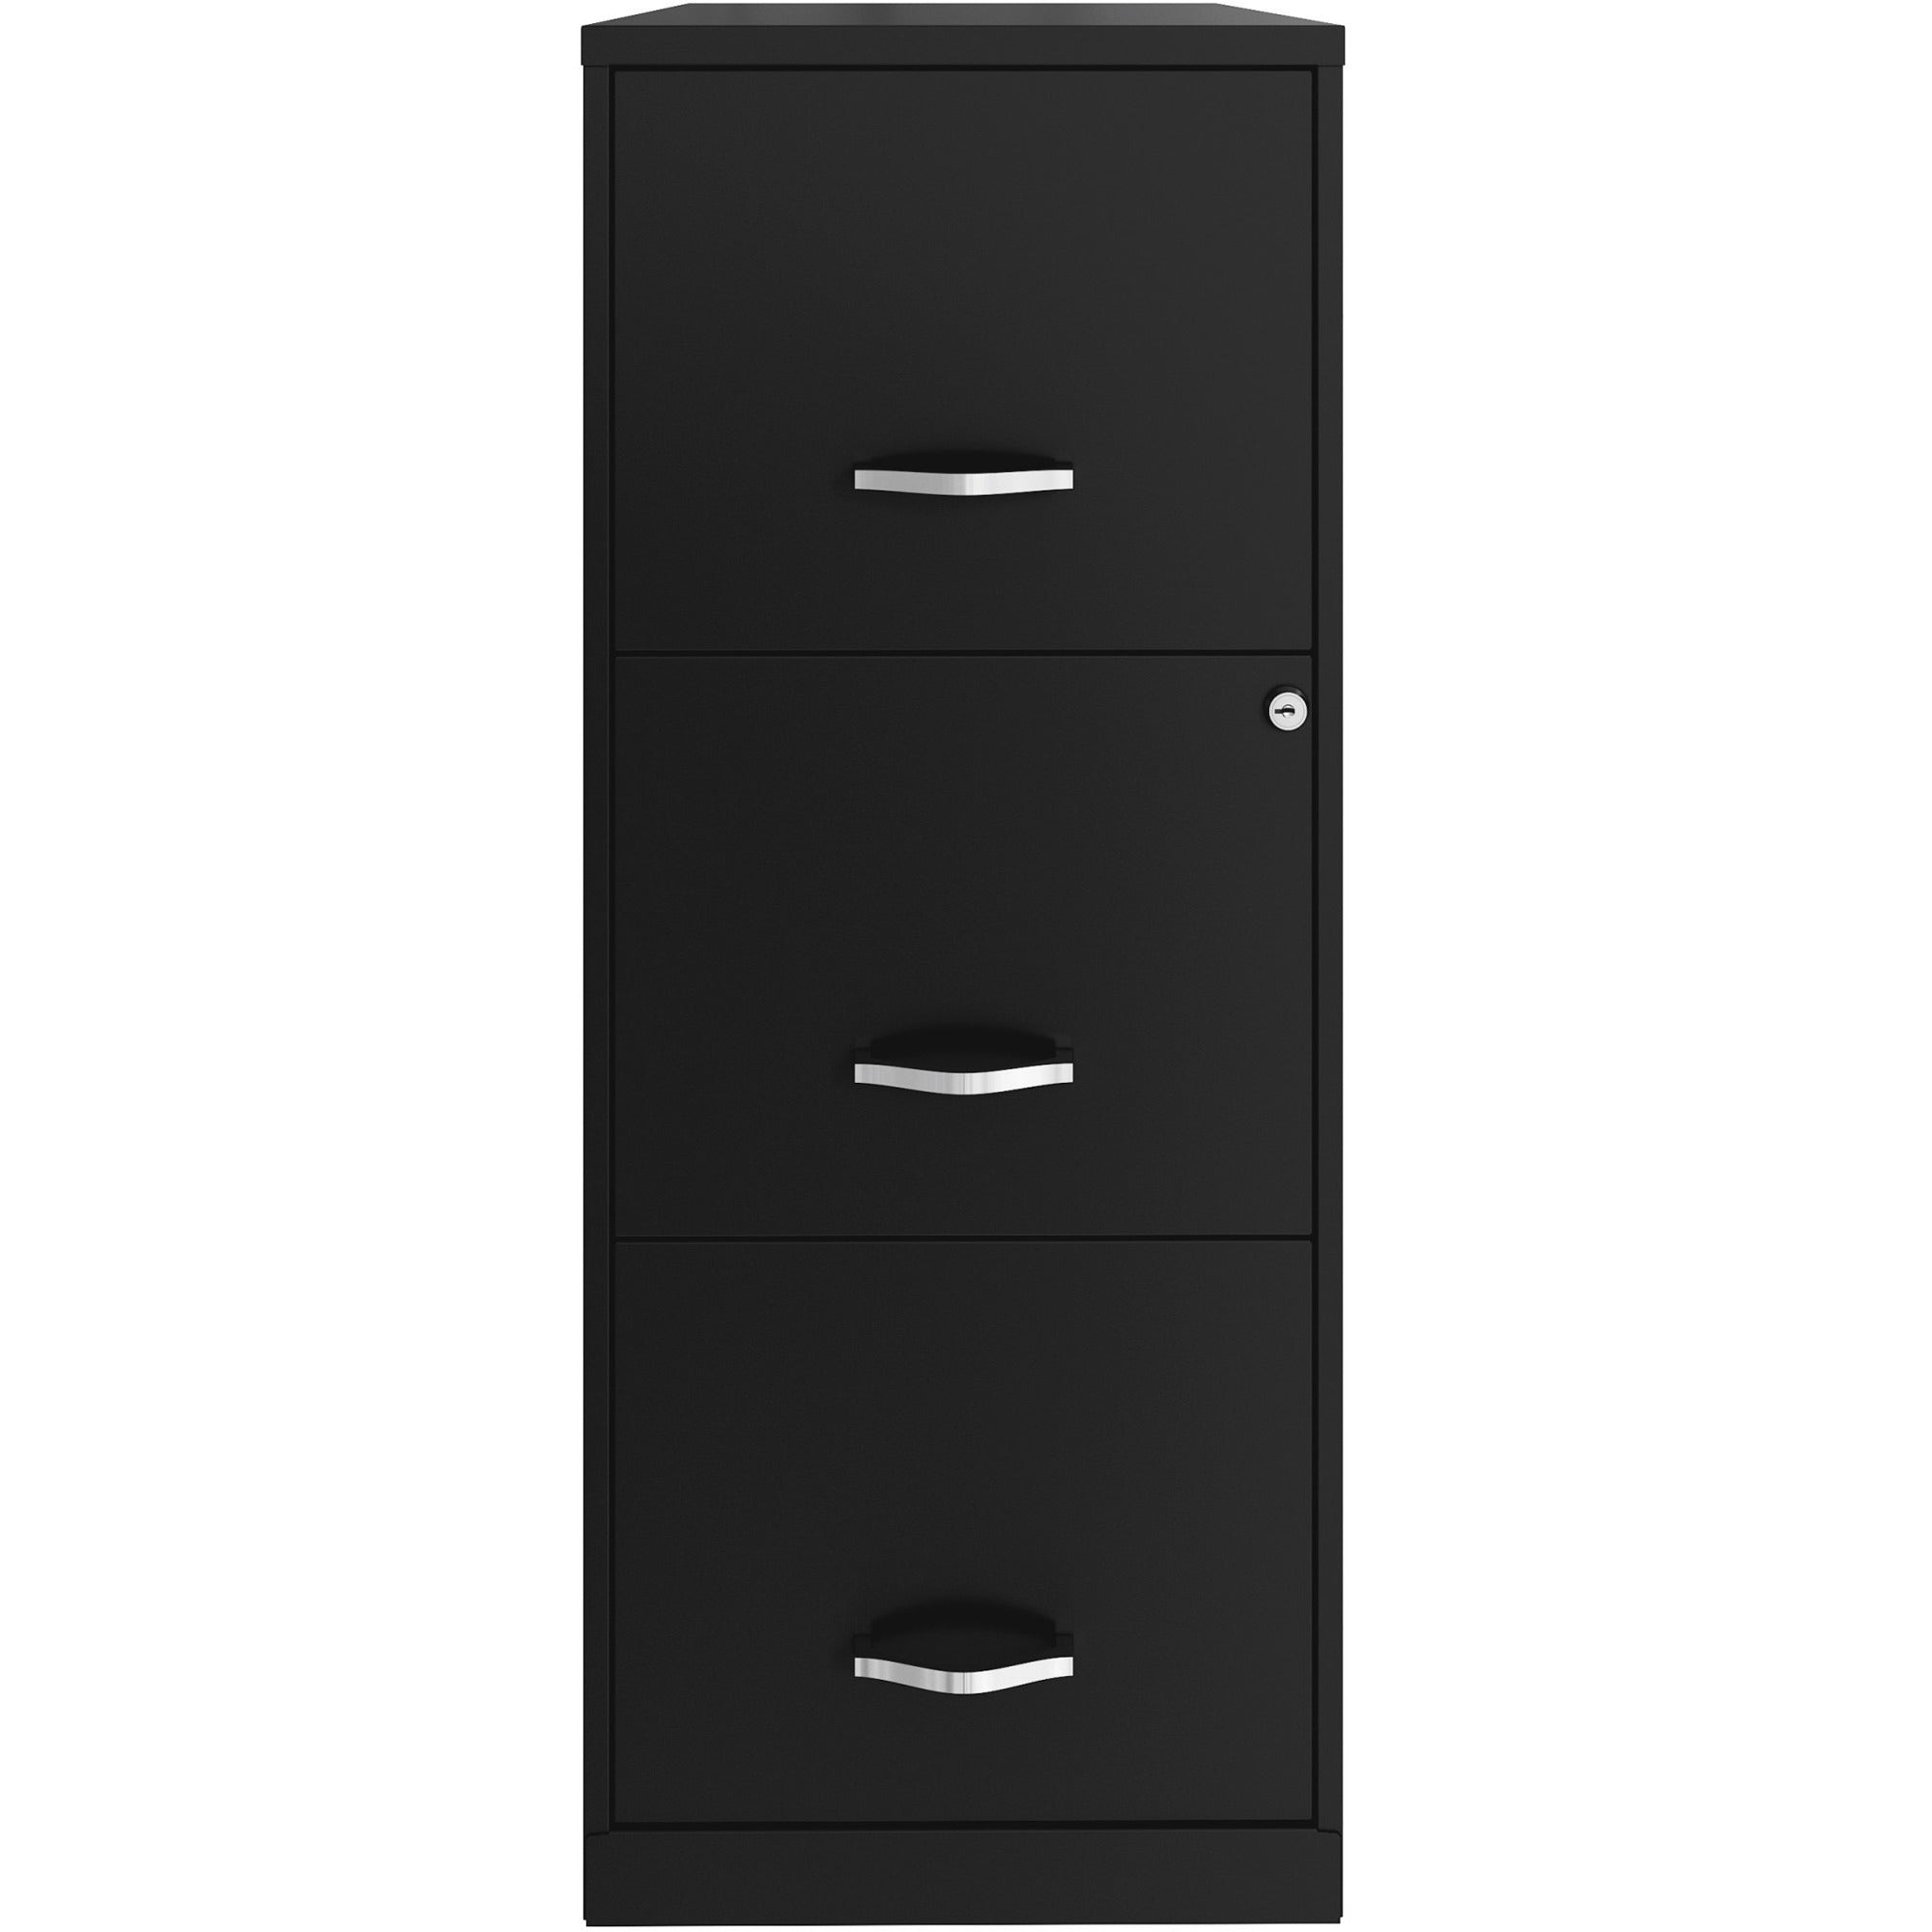 nusparc-vertical-file-cabinet-142-x-18-x-355-3-x-drawers-for-file-letter-vertical-cam-lock-glide-suspension-anti-tip-nonporous-surface-3-4-drawer-extension-black-baked-enamel-metal-recycled_nprvf318ffbk - 2